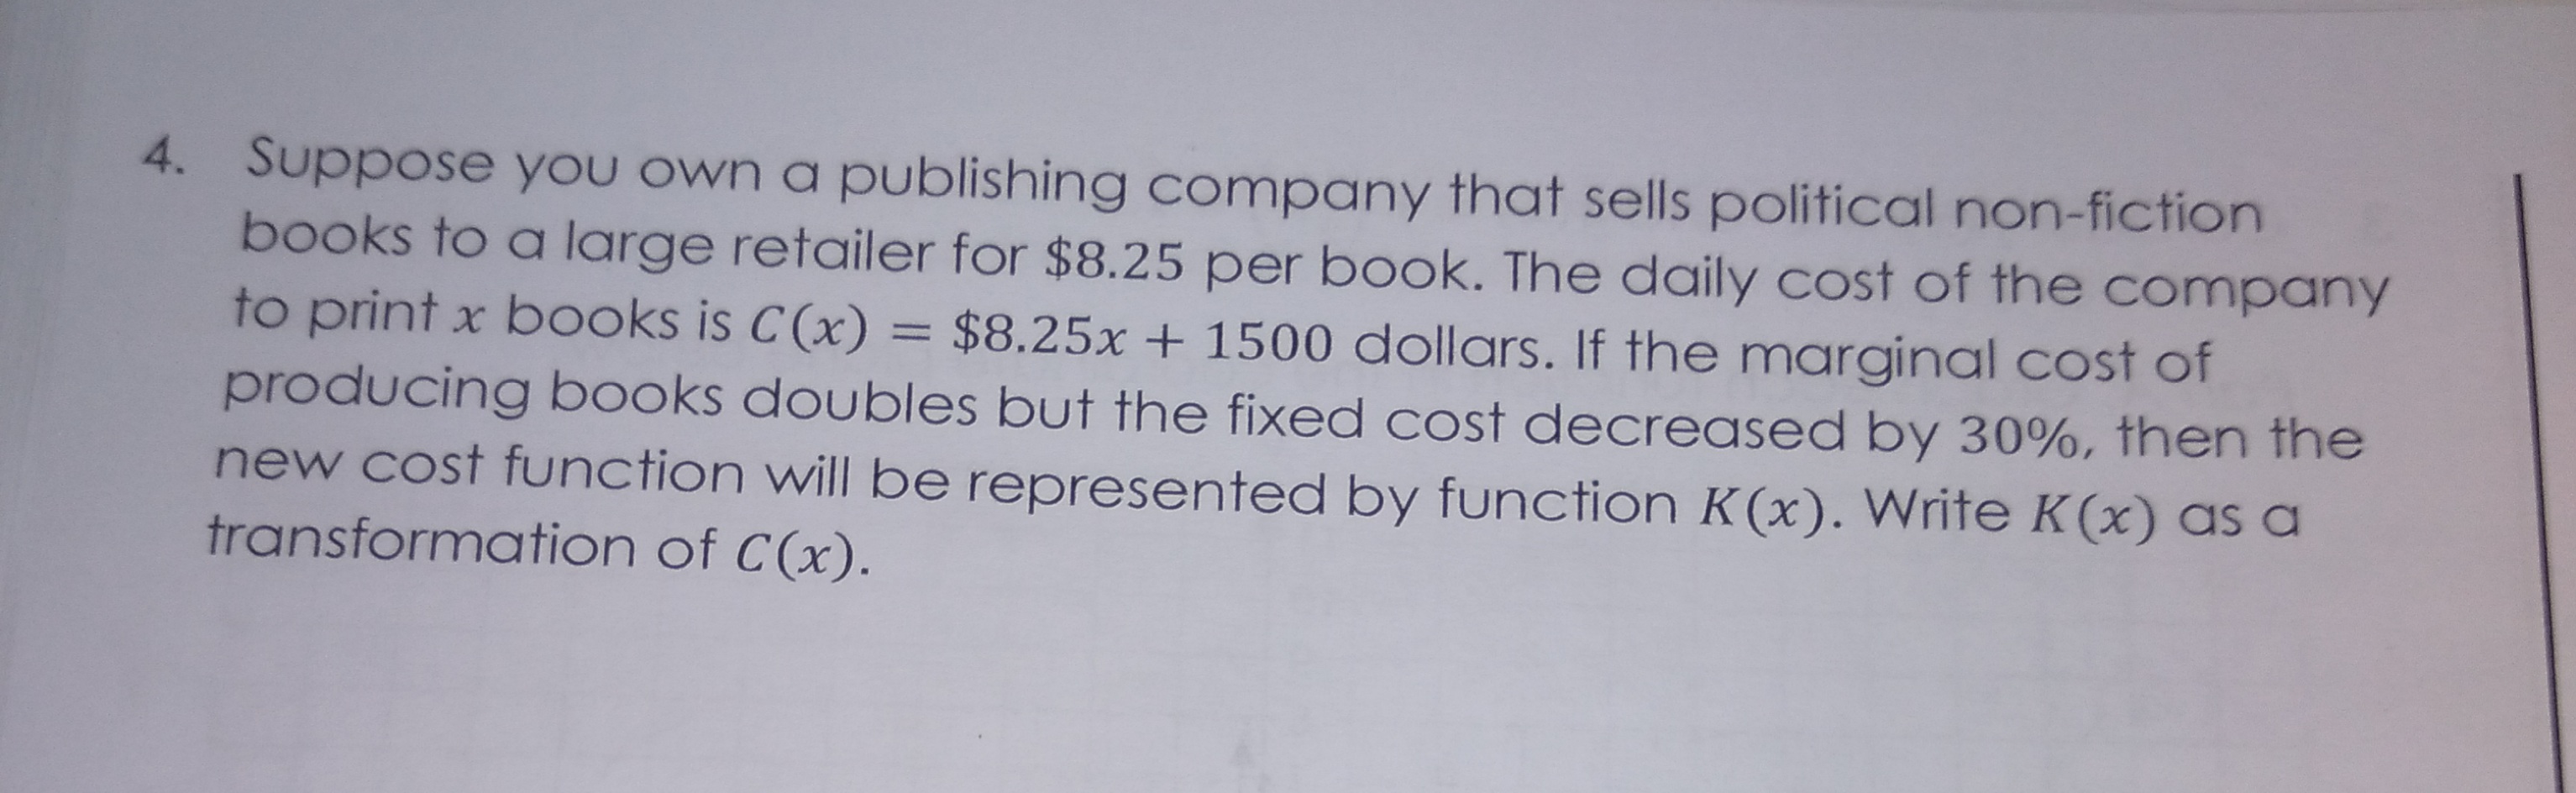 Suppose yoU own a publishing company that sells political non-fiction
books to a large retailer for $8.25 per book. The daily cost of the company
to print x books is C (x) = $8.25x + 1500 dollars. If the marginal cost of
producing books doubles but the fixed cost decreased by 30%, then the
new cost function will be represented by function K(x). Write K(x) as a
transformation of C(x).
%3D
